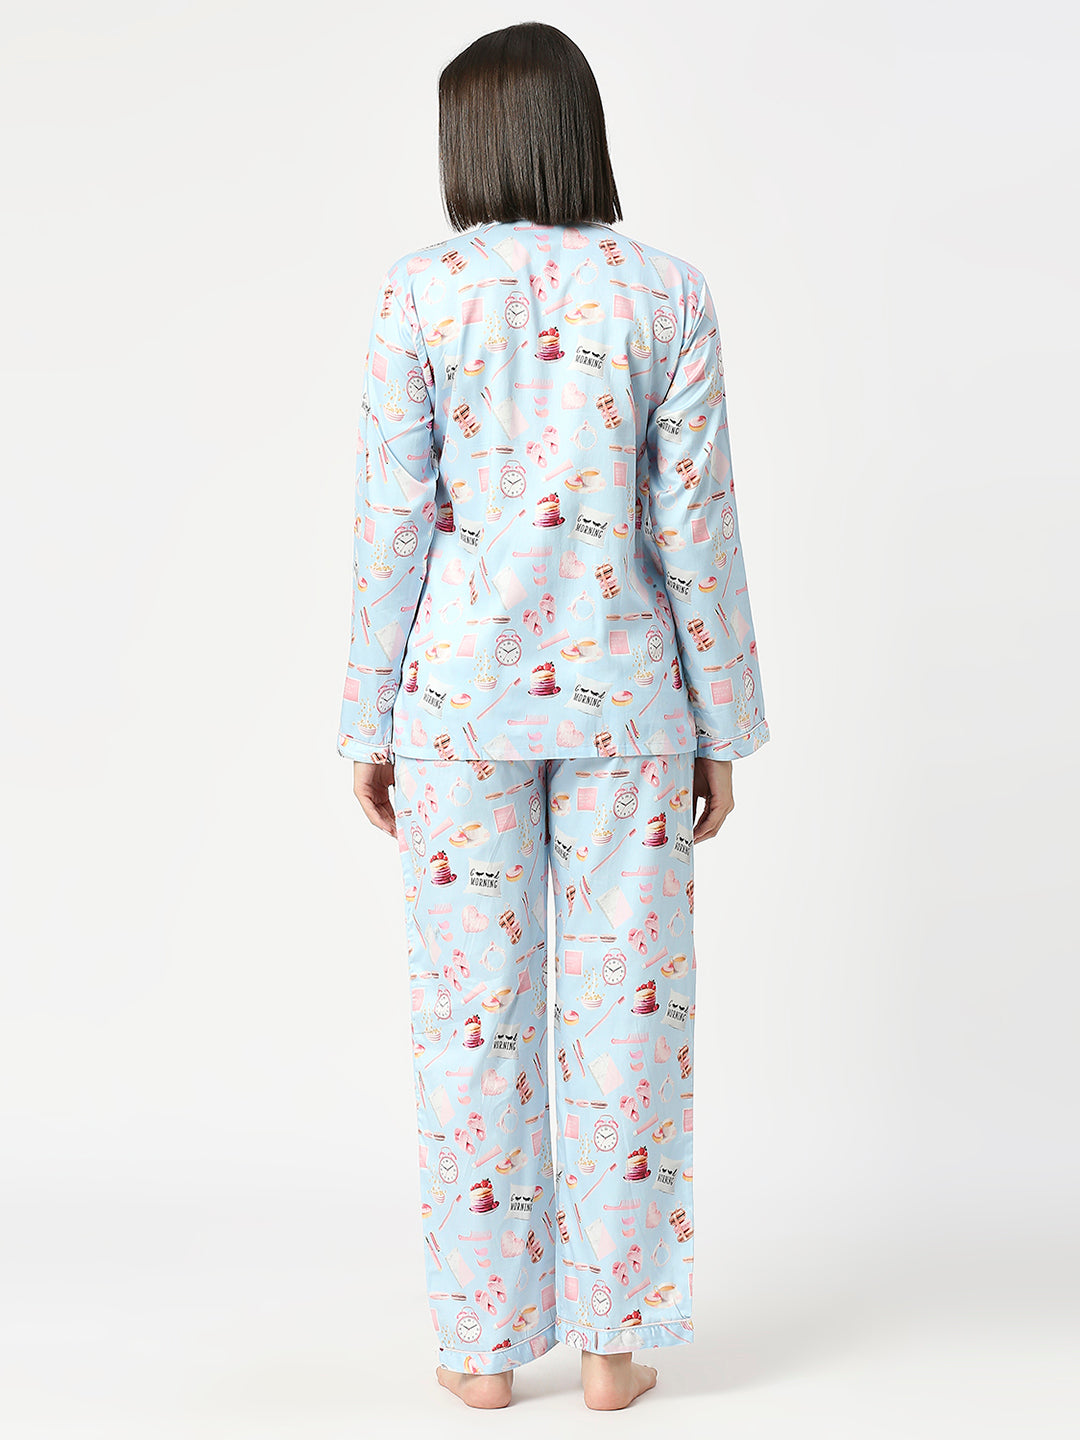 Good Morning Button Down Pj Set - Pure Cotton Pj Set with Notched Collar